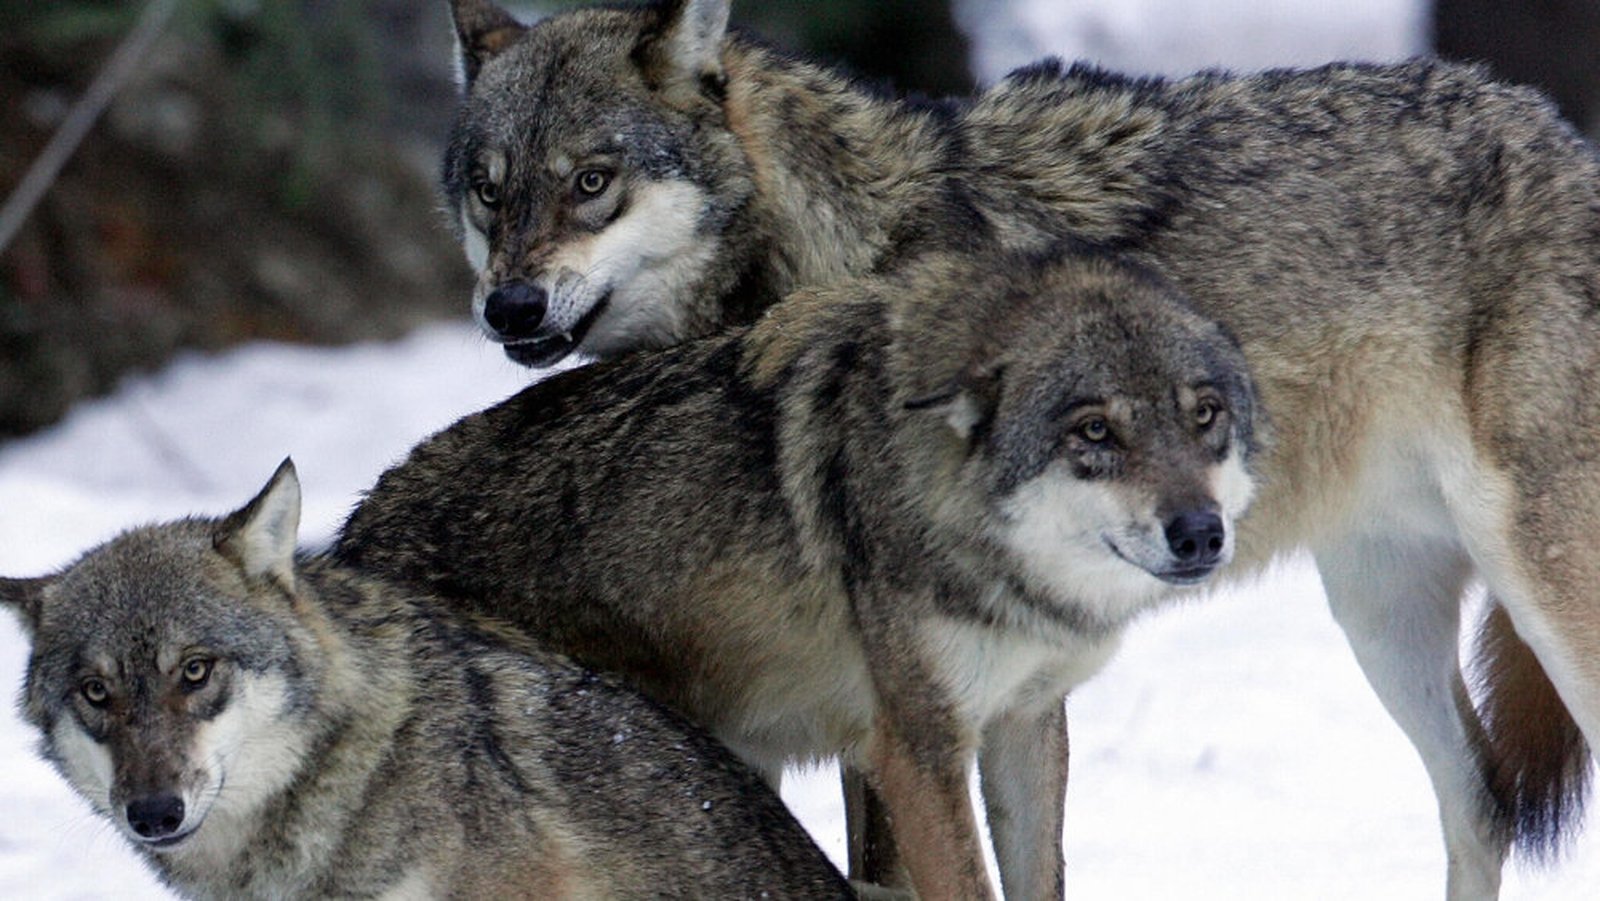 Living wolfs. Аса волка. Wolves as Pets and working animals. C A Wolves. The Wolf will learn you.